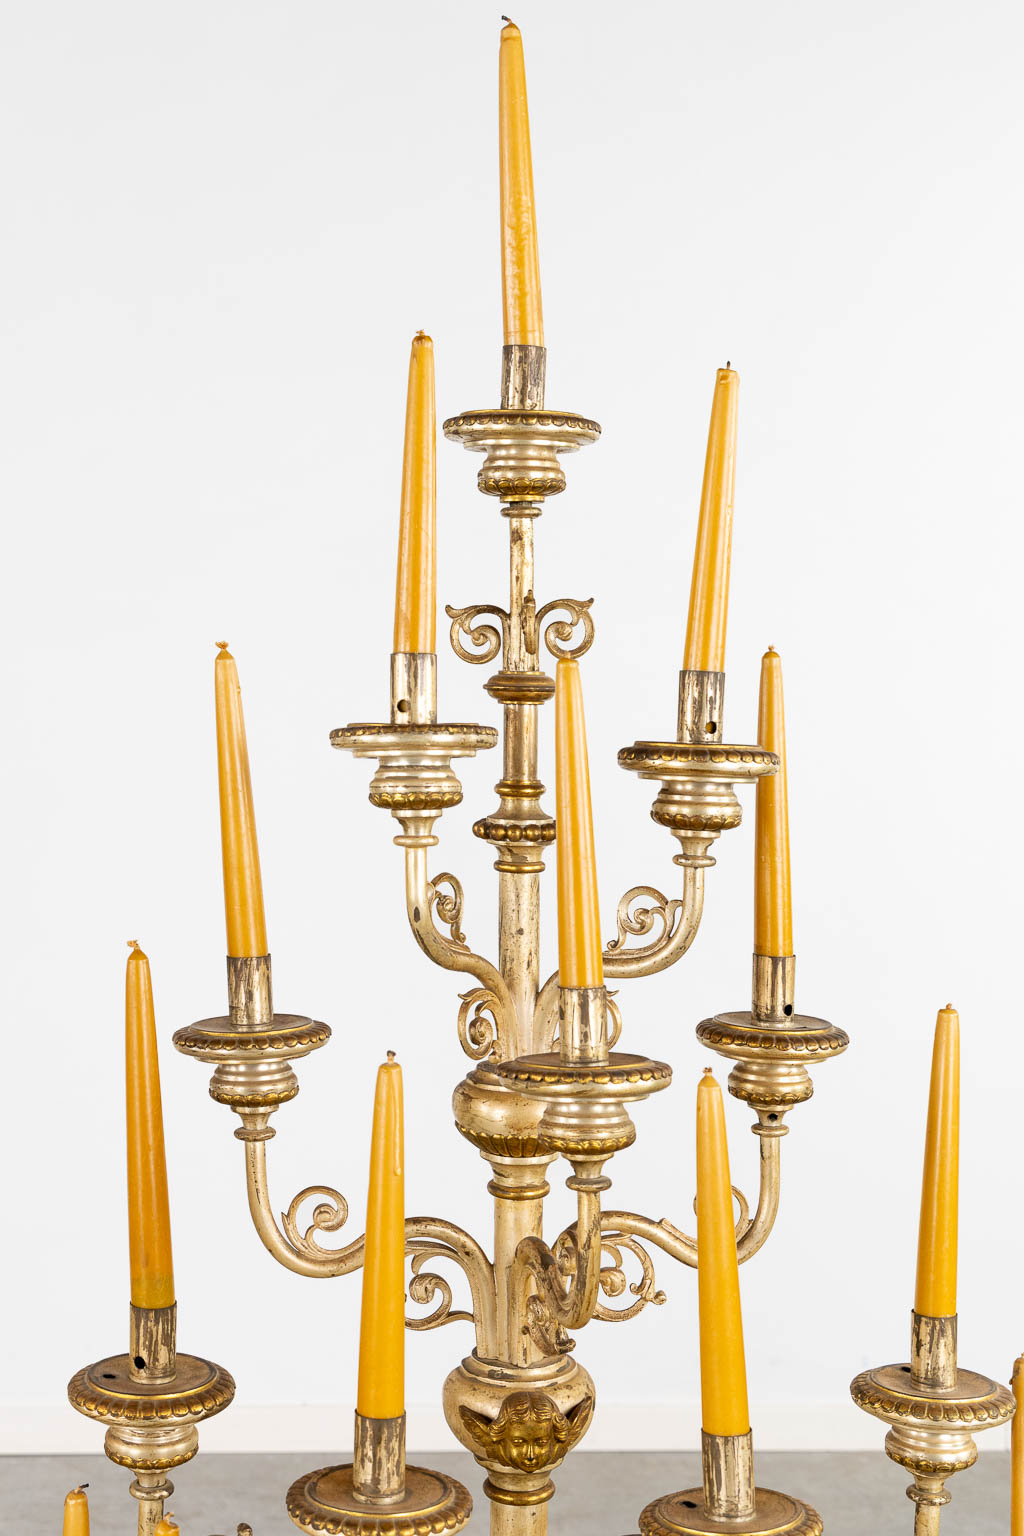 An impressive pair of candelabra, 15 candles, gold and silver-plated metal. (L:44 x W:60 x H:138 cm)